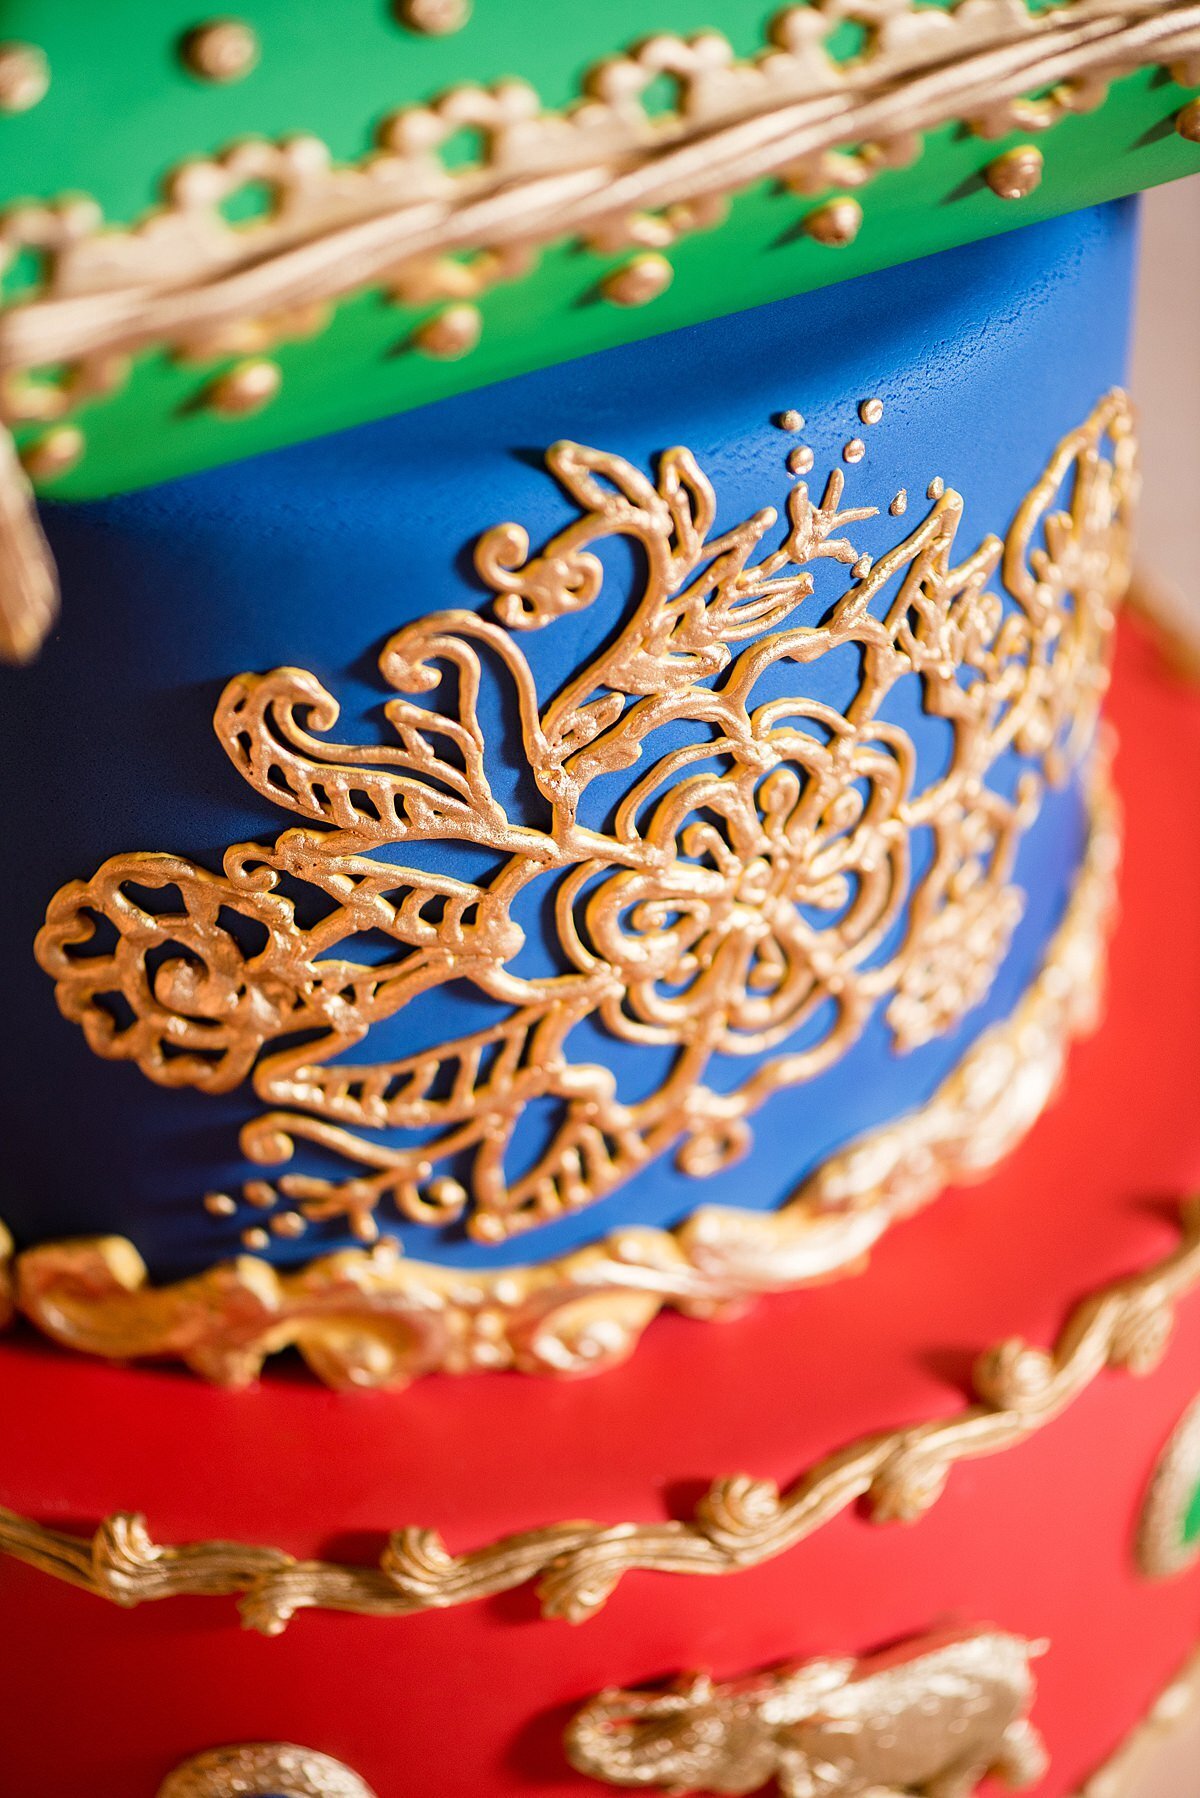 Close up image of a red, blue and green wedding cake for a Hindu wedding with gold elephants and gold mandala detail